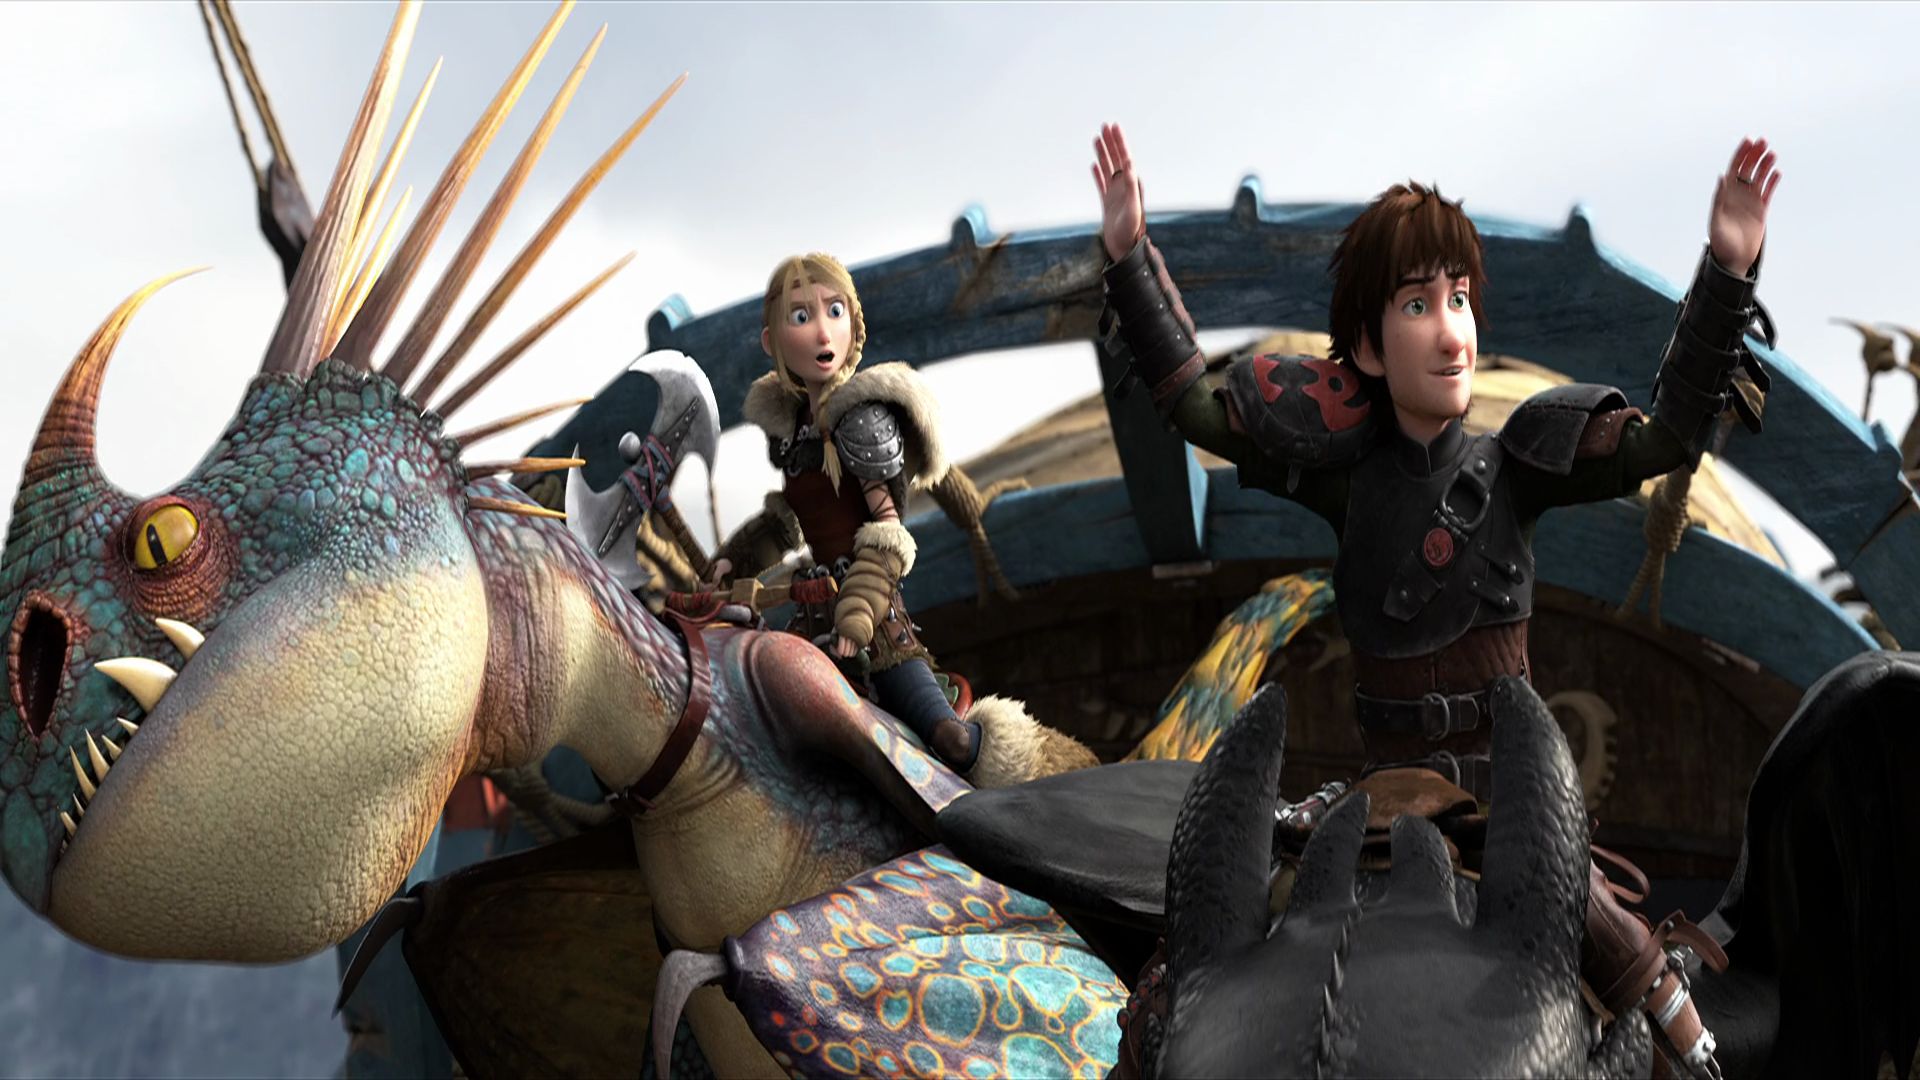 movie, how to train your dragon 2, astrid (how to train your dragon), hiccup (how to train your dragon), how to train your dragon